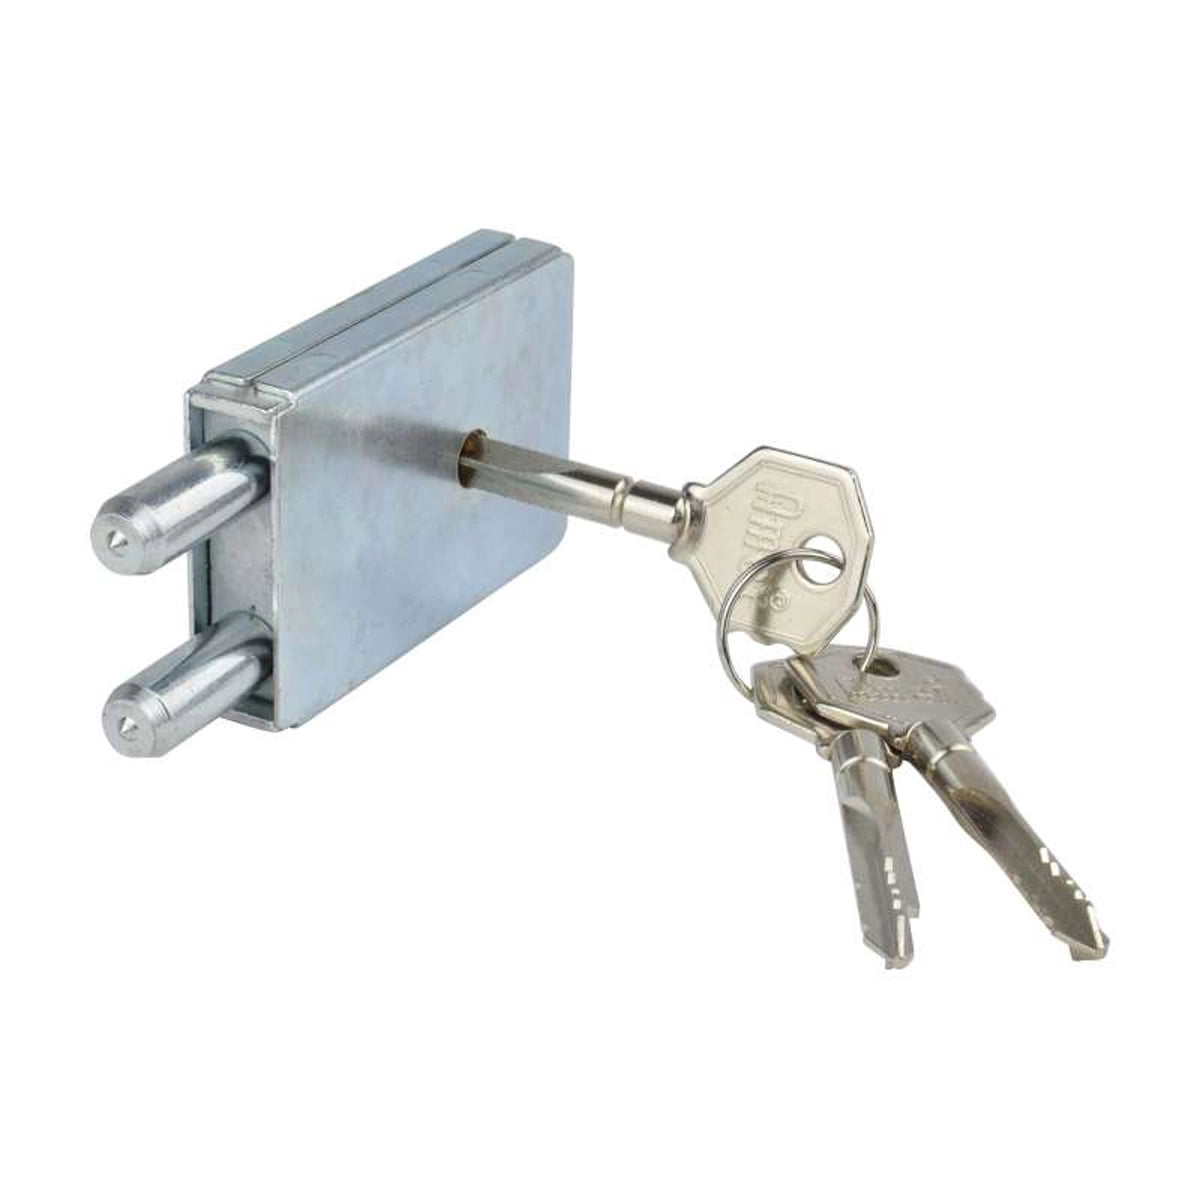 SAS Replacement Lock for Fortress Hitch Lock Range